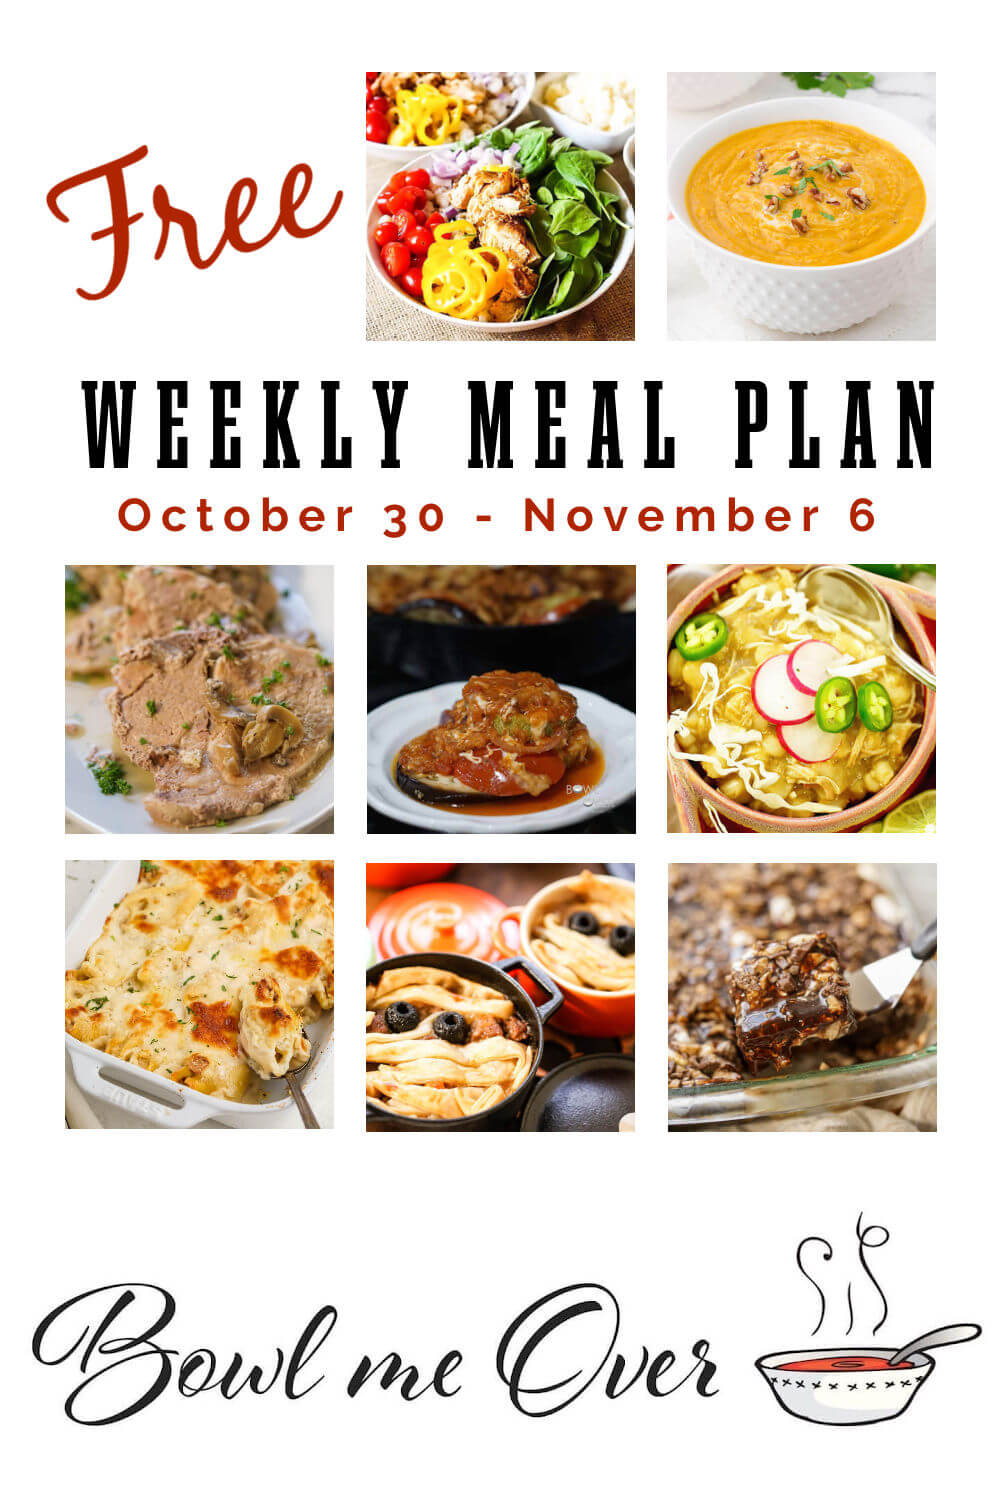 Collage of photos for weekly meal plan 43 with Pinterest overlay.